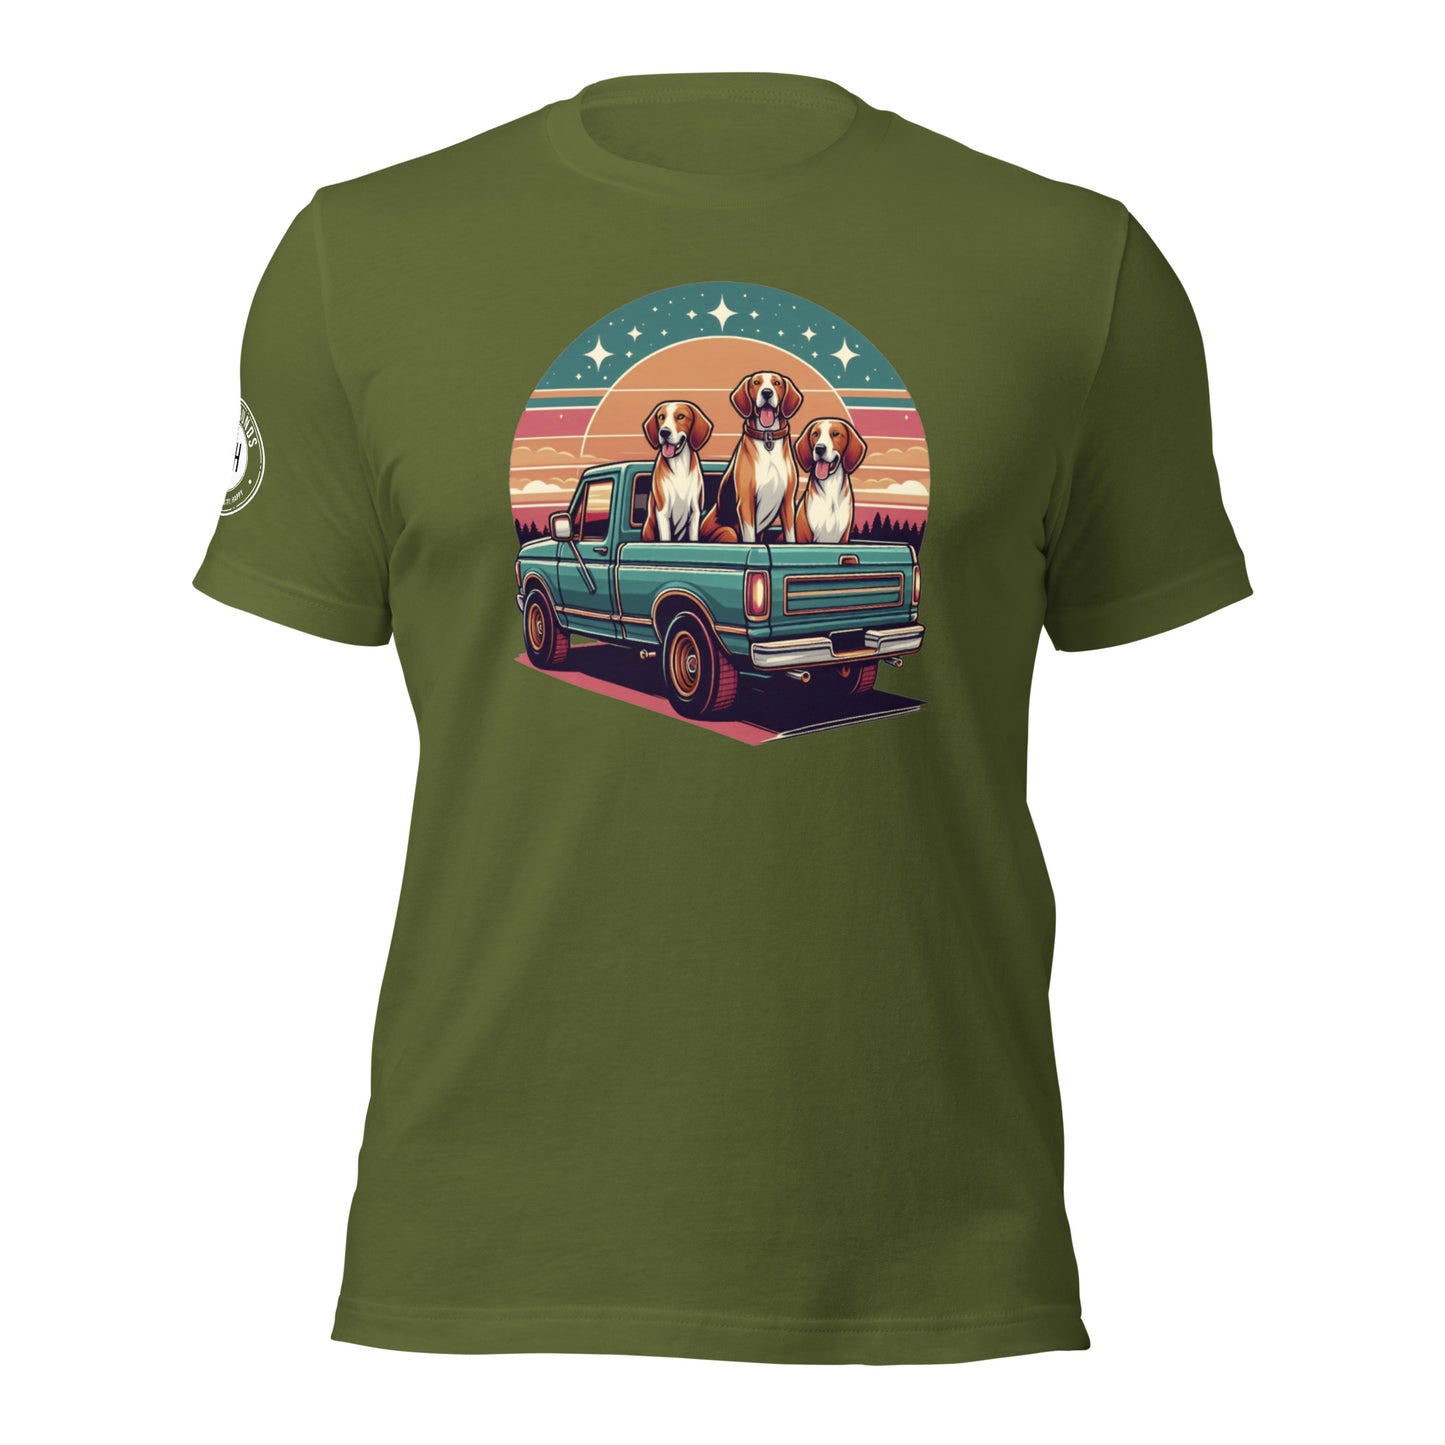 Vintage Truck with Hounds